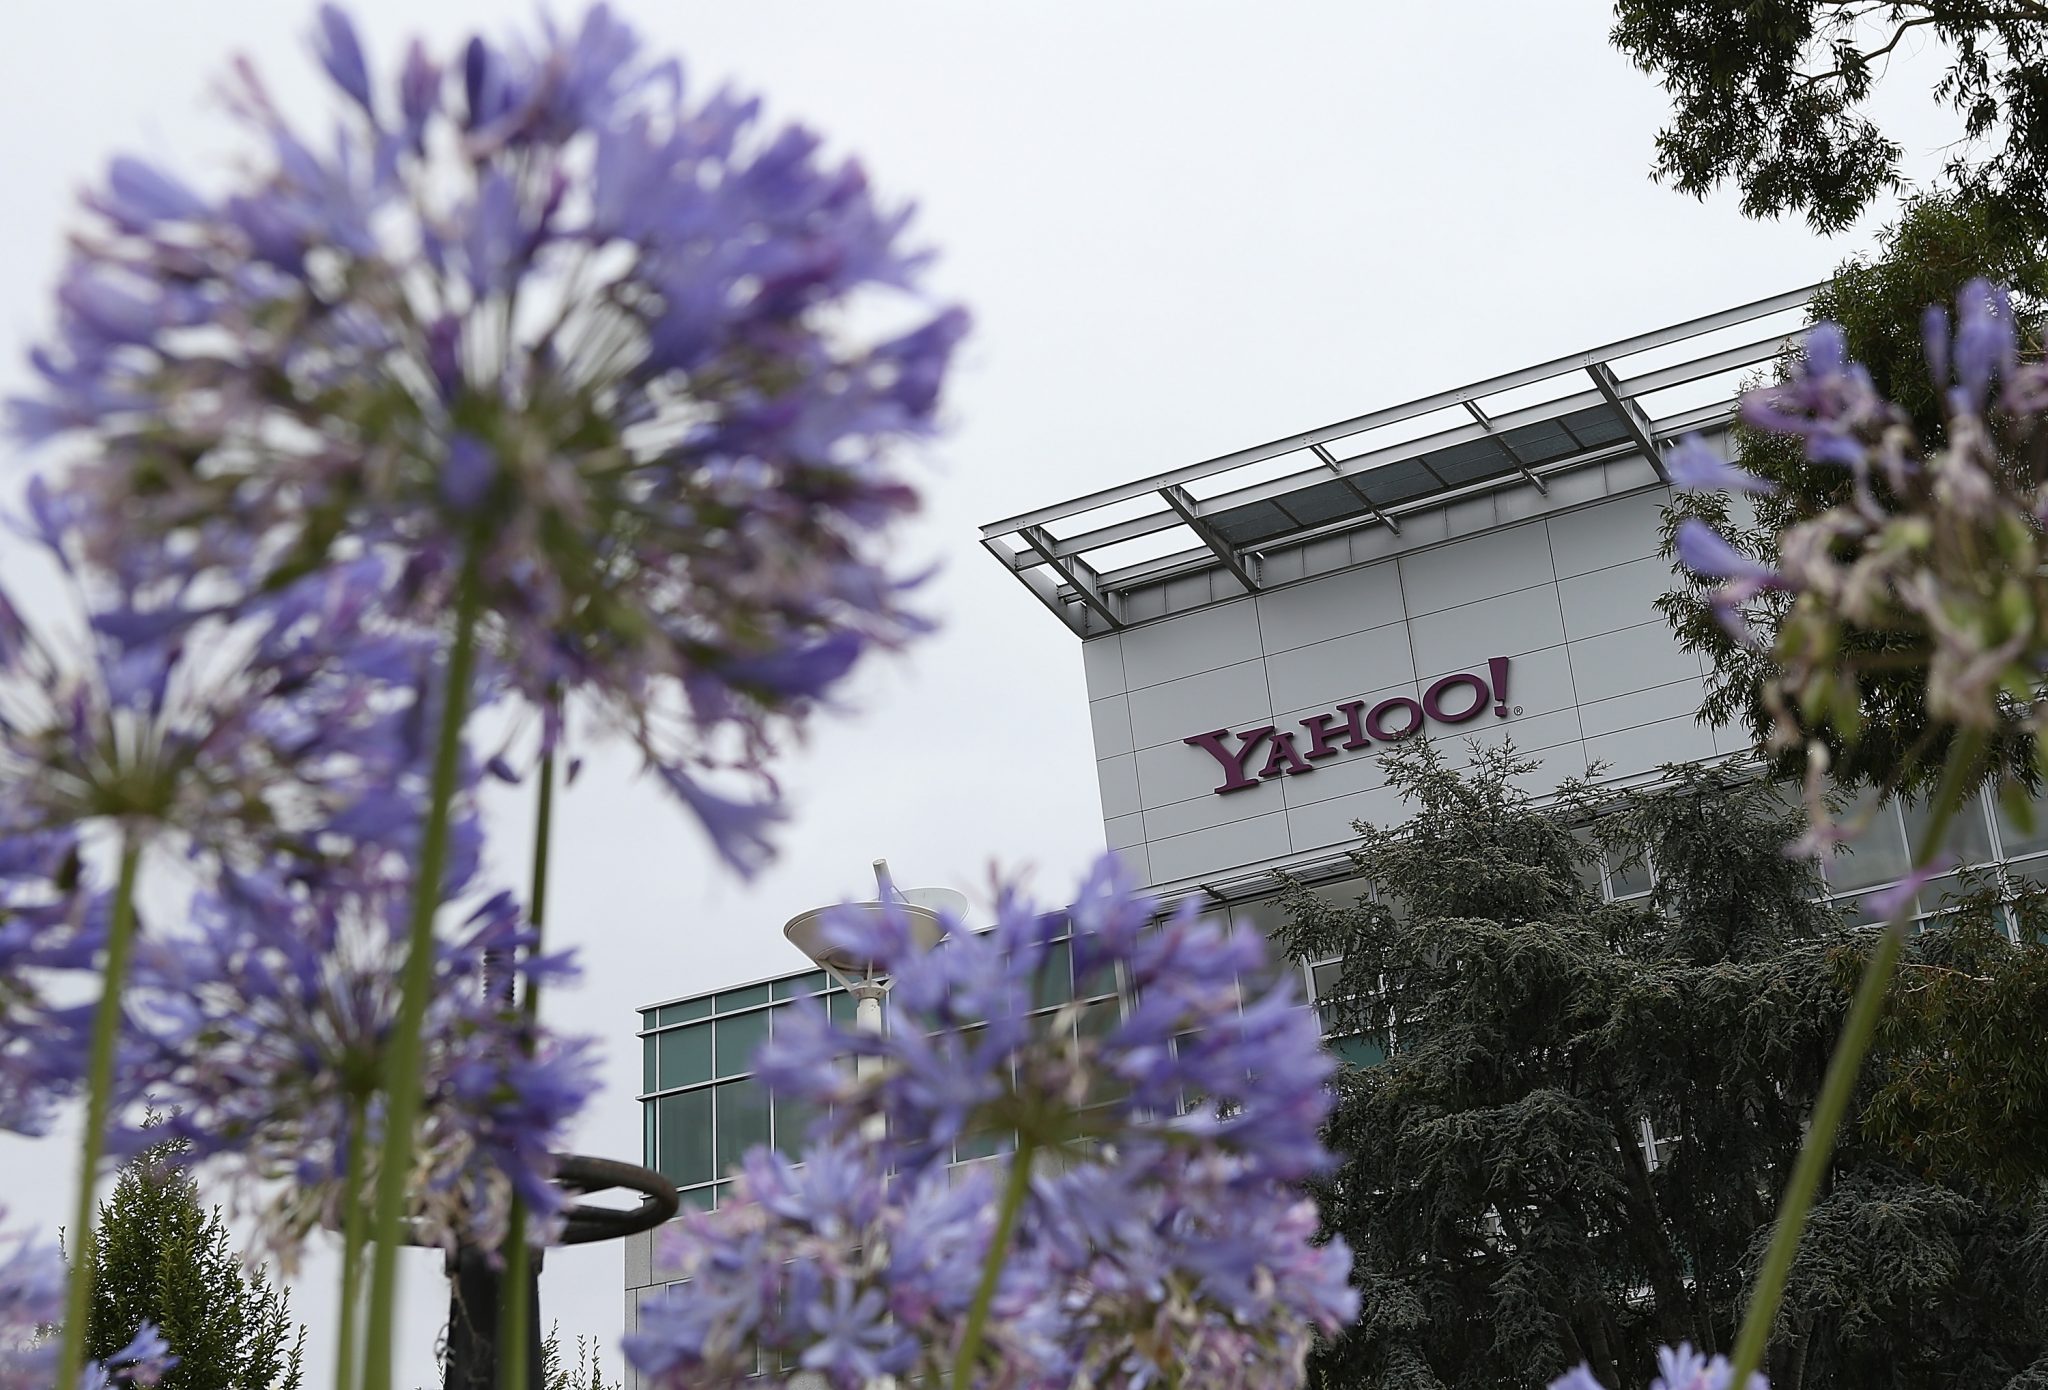 SUNNYVALE, CA - JULY 17: The Yahoo logo is displayed in front of the Yahoo headqarters on July 17, 2012 in Sunnyvale, California. Yahoo will report Q2 earnings one day after former Google executive Marissa Mayer was named as the new CEO. Photo by Justin Sullivan/Getty Images)   Justin Sullivan/Getty Images/AFP